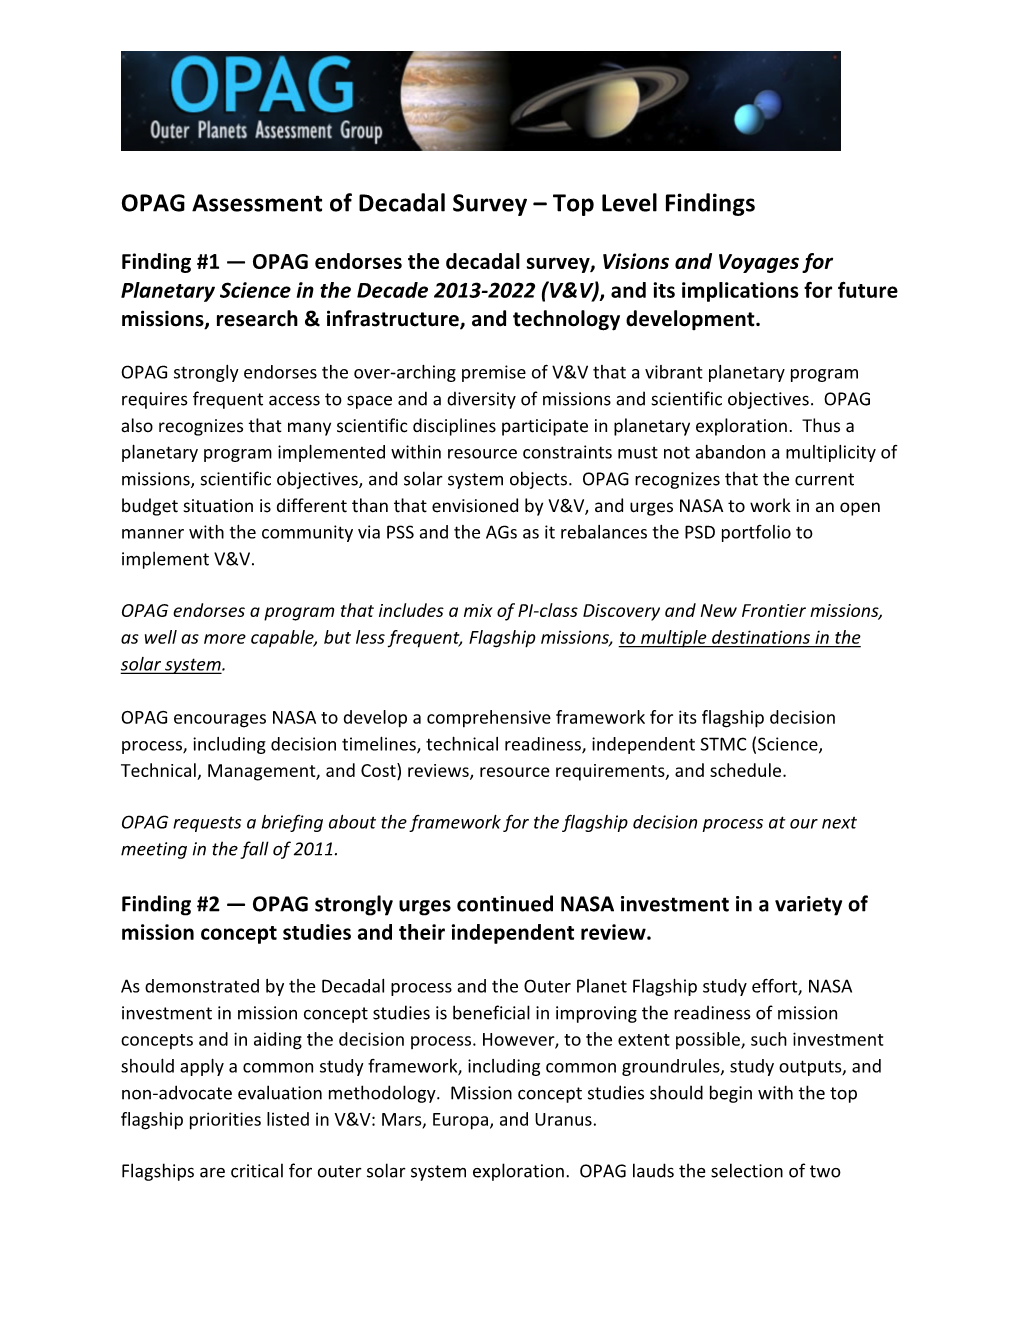 OPAG Assessment of Decadal Survey – Top Level Findings